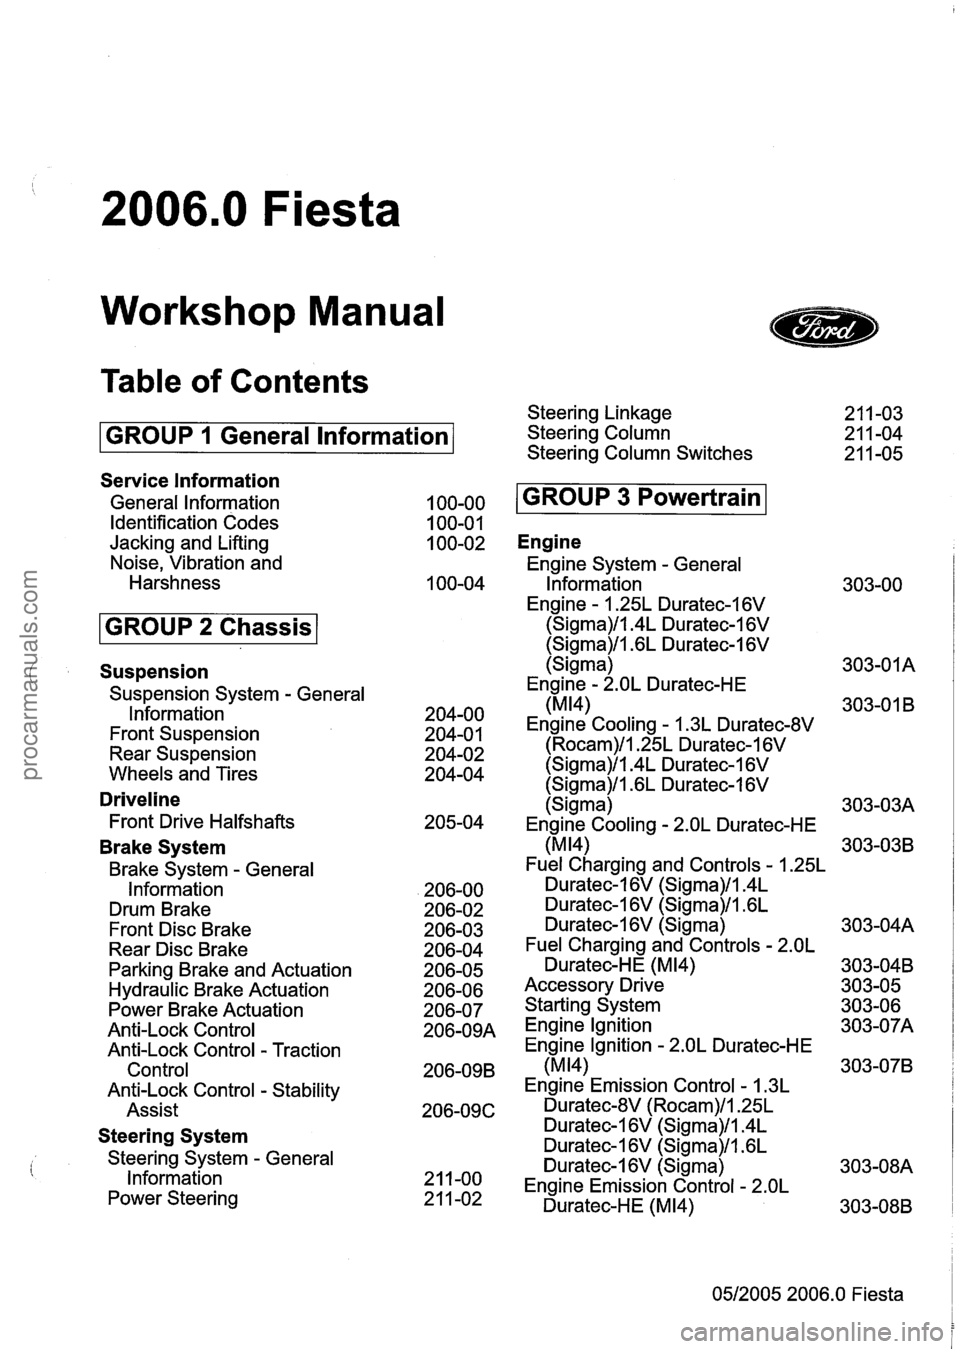 FORD FIESTA 2007  Workshop Manual 
2006.0 Fiesta 
Workshop Manual 
Table of Contents 
GROUP 1 General lnformation 
Service lnformation 
General lnformation 
Identification Codes 
Jacking  and Lifting 
Noise, Vibration  and 
Harshness 